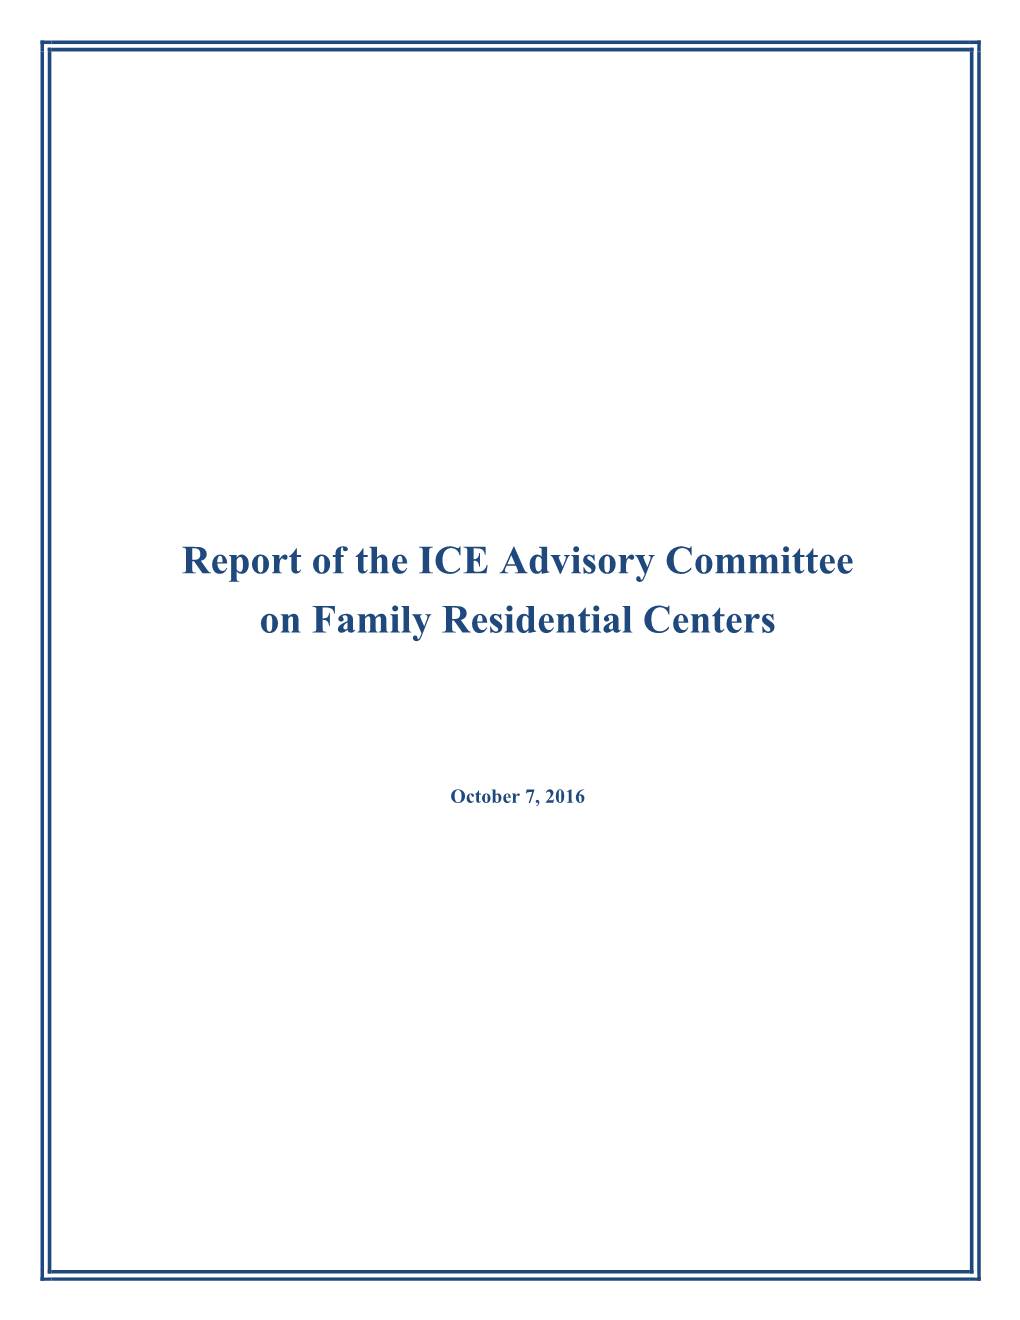 Report of the ICE Advisory Committee on Family Residential Centers